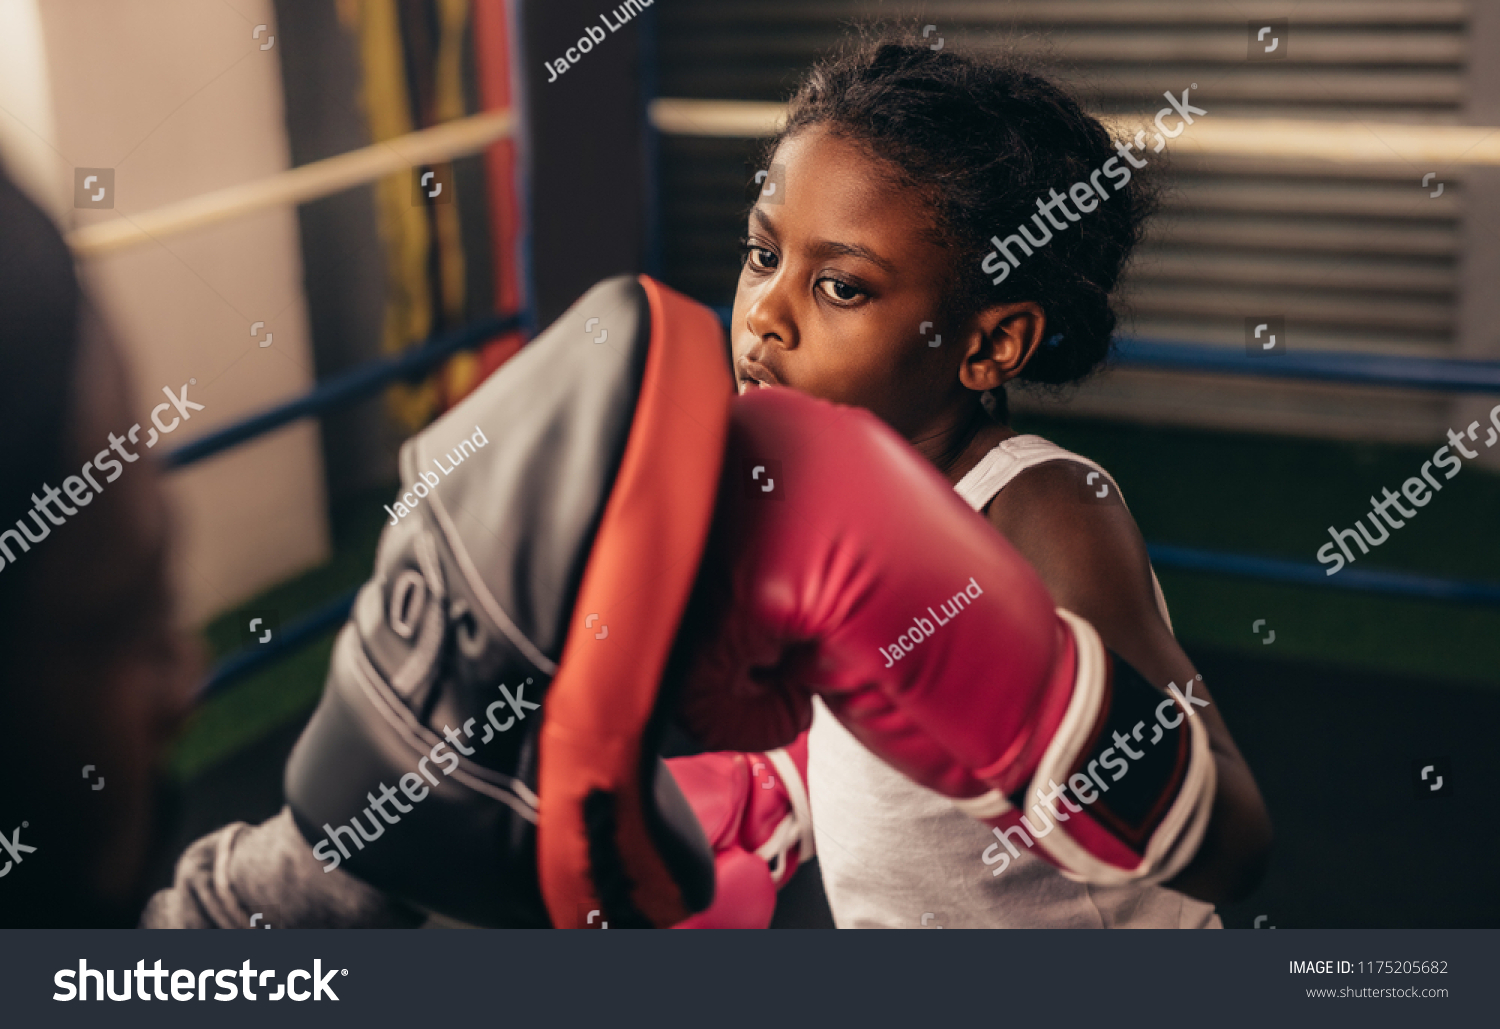 Close up of a kid training inside a boxing ring. Kid boxer wearing boxing gloves practicing punches on a punching pad. #1175205682